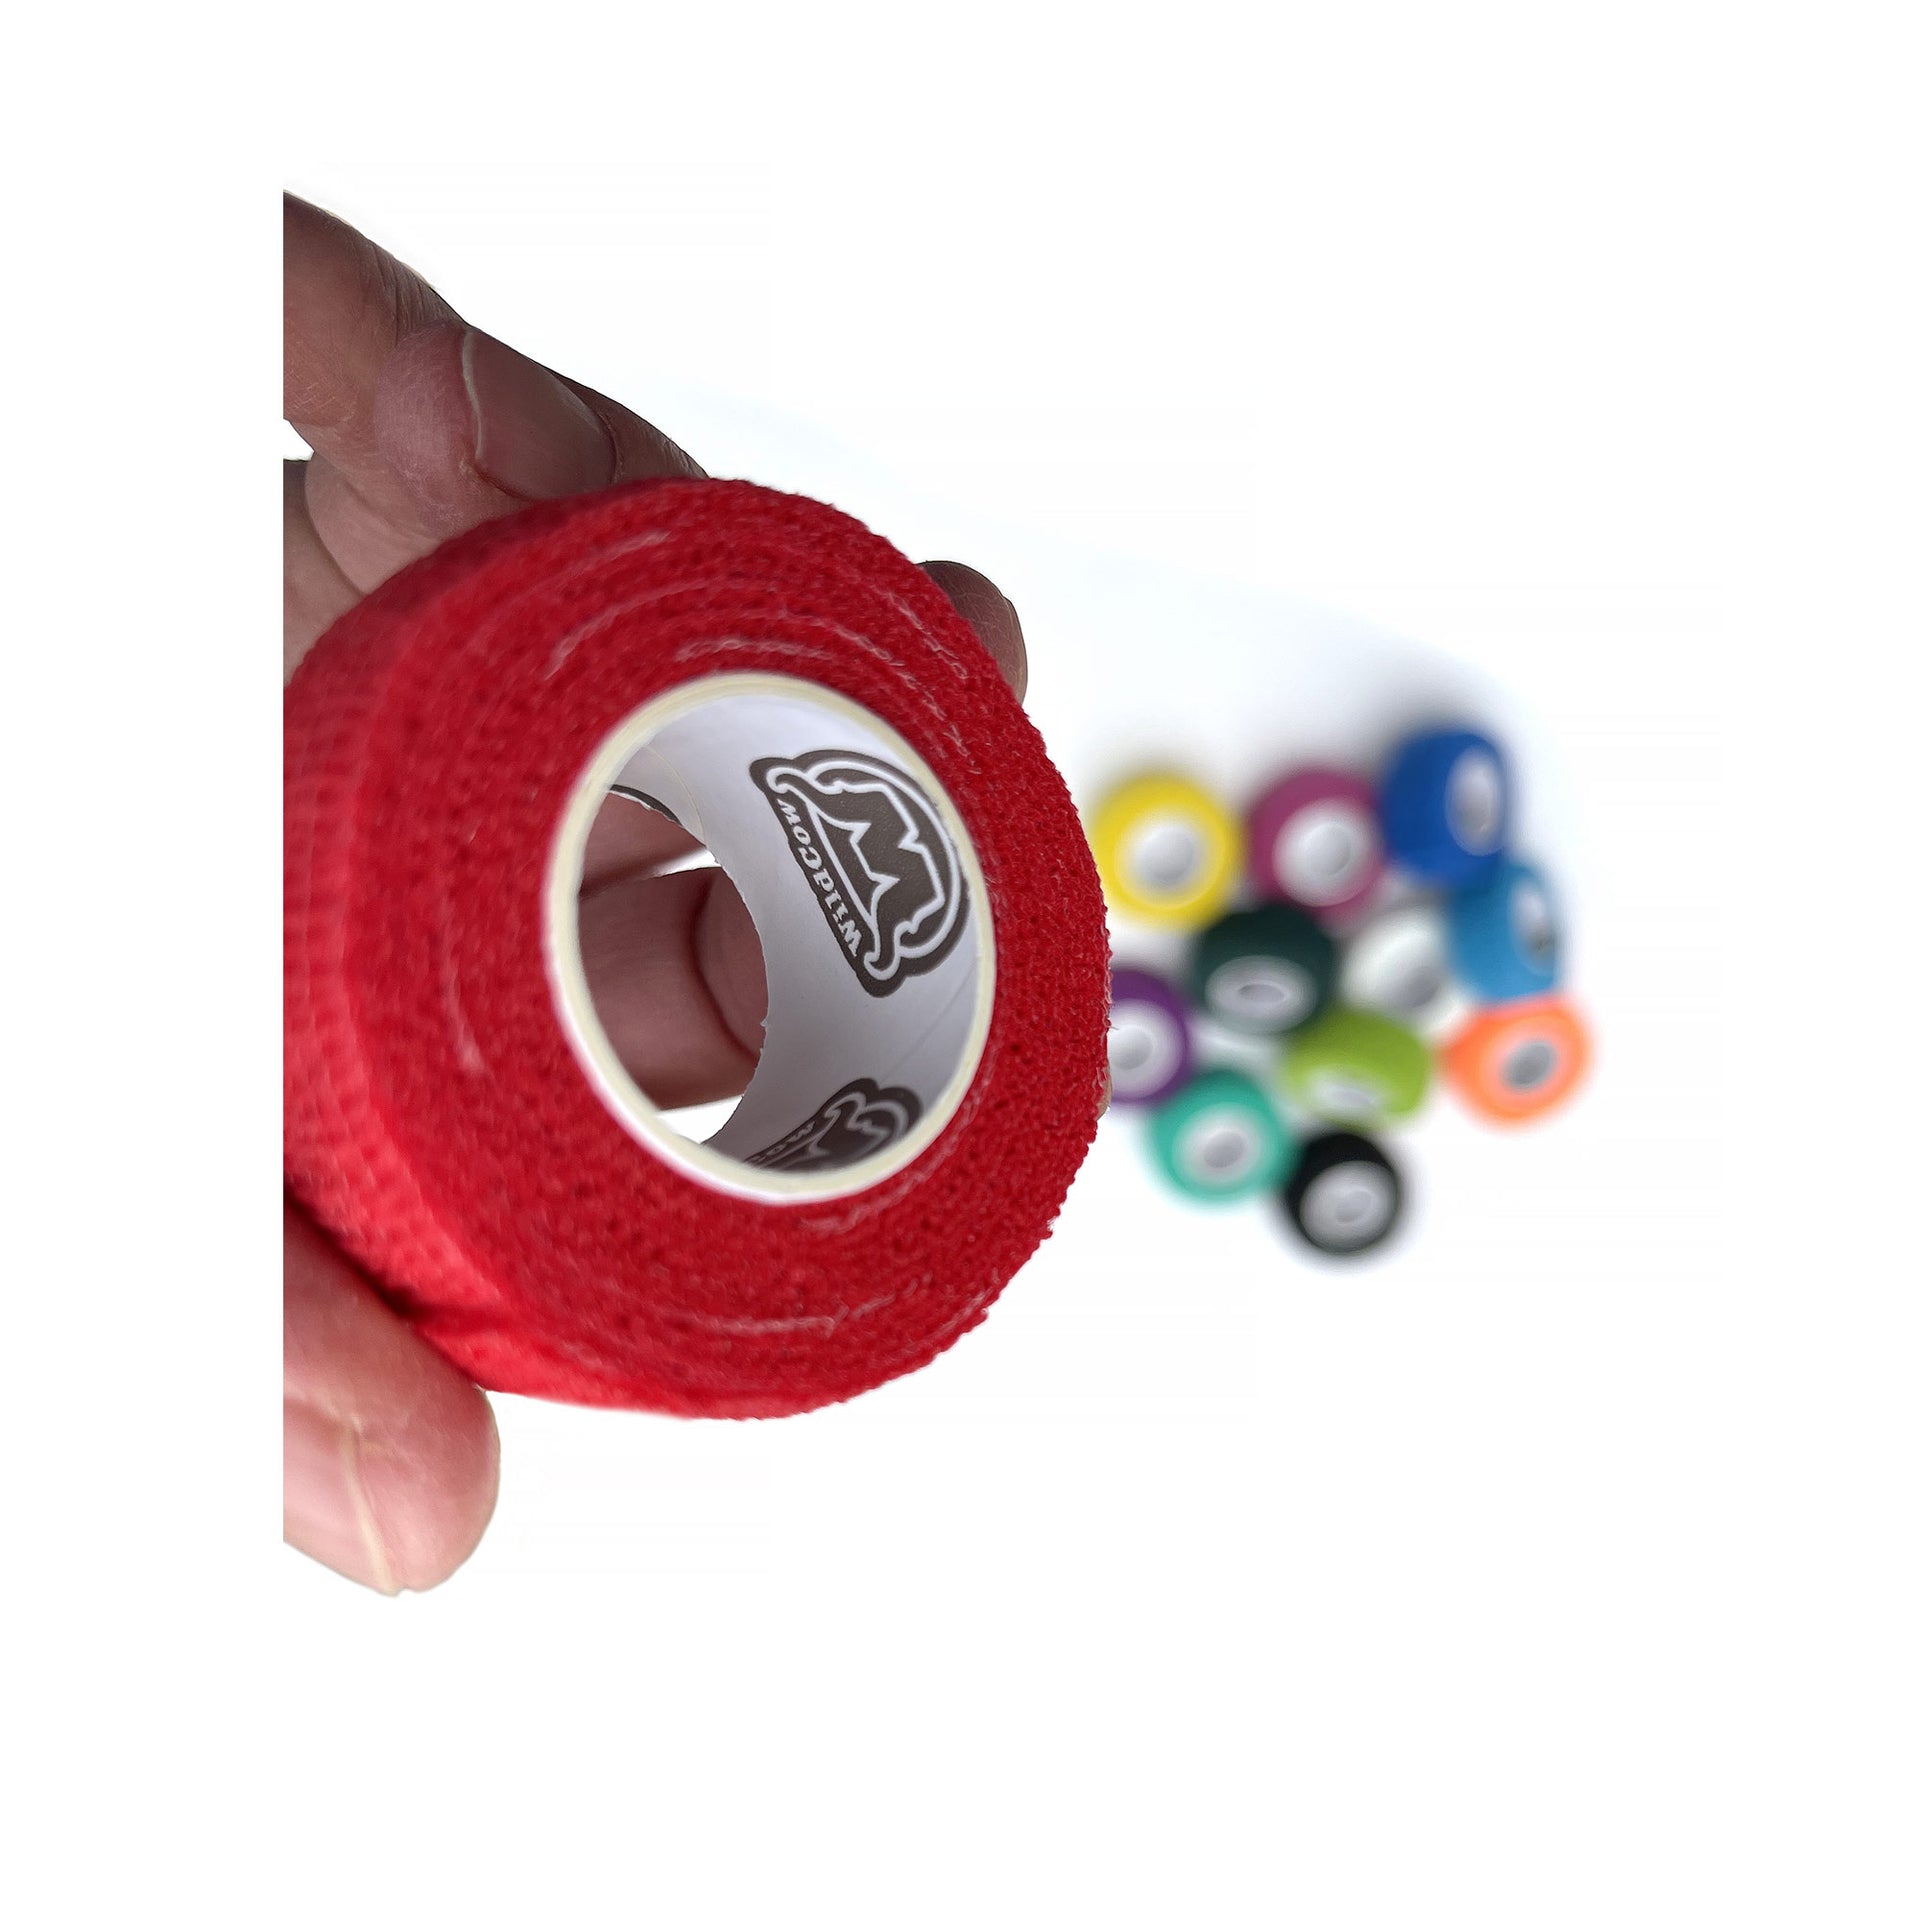 WildCow 1 Inch Multicolored Vet Wrap - 24/48 Packs - Red roll held in hand